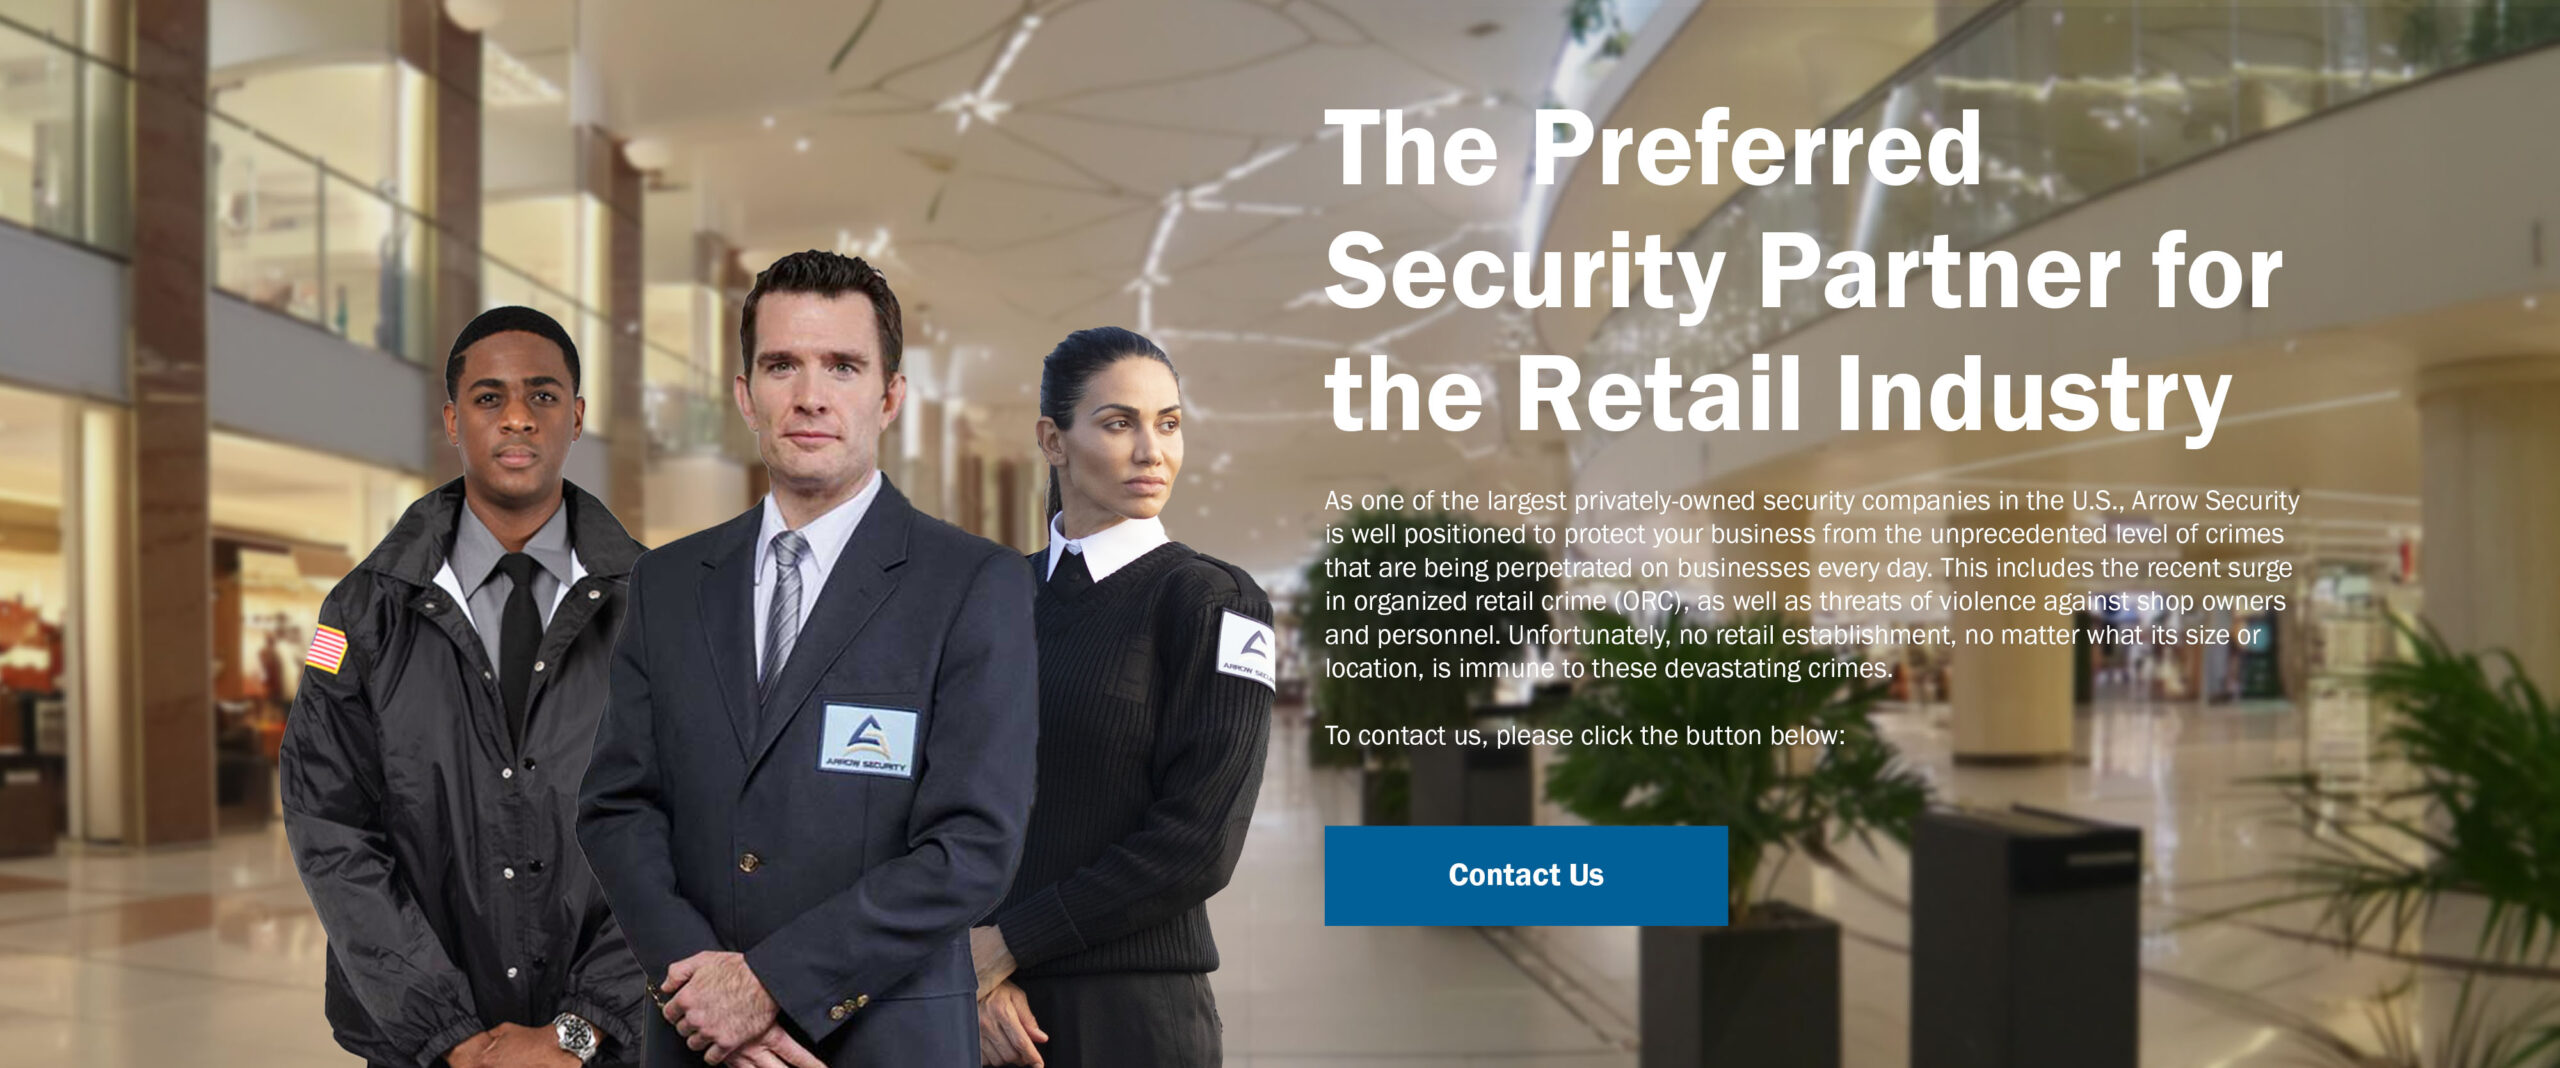 As one of the largest privately-owned security companies in the U.S., Arrow Security is well positioned to protect your business from the unprecedented level of crimes that are being perpetrated on businesses every day. This includes the recent surge in organized retail crime (ORC), as well as threats of violence against shop owners and personnel. Unfortunately, no retail establishment, no matter what its size or location, is immune to these devastating crimes.